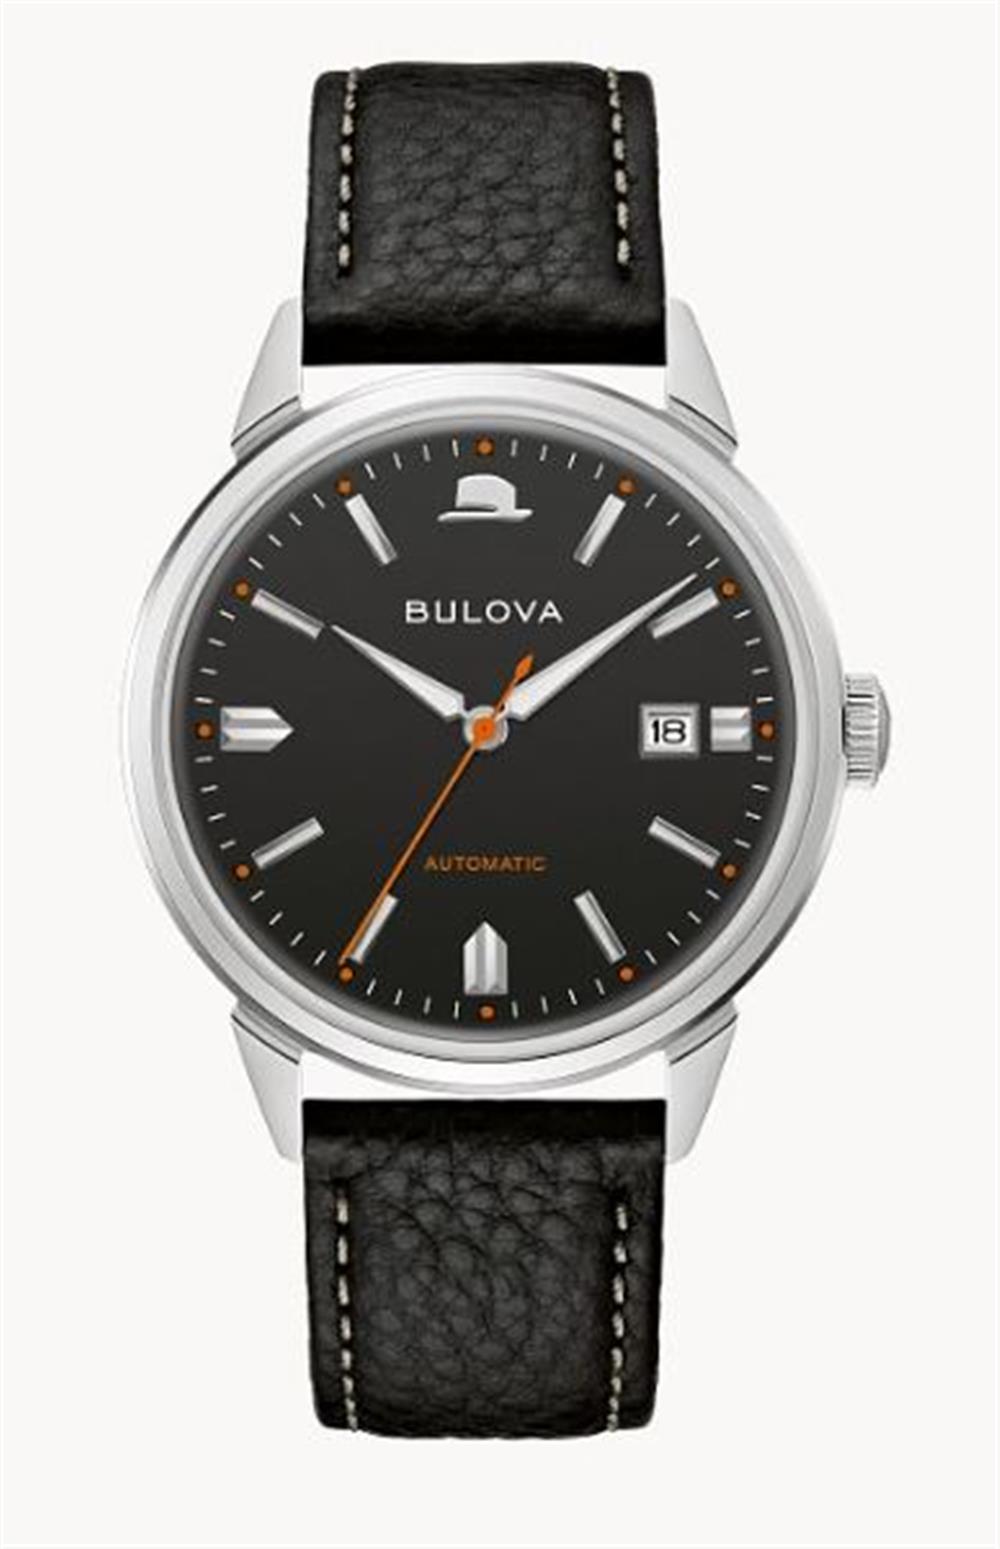 Bulova Summer Wind Frank Sinatra Series Watch with Leather Strap